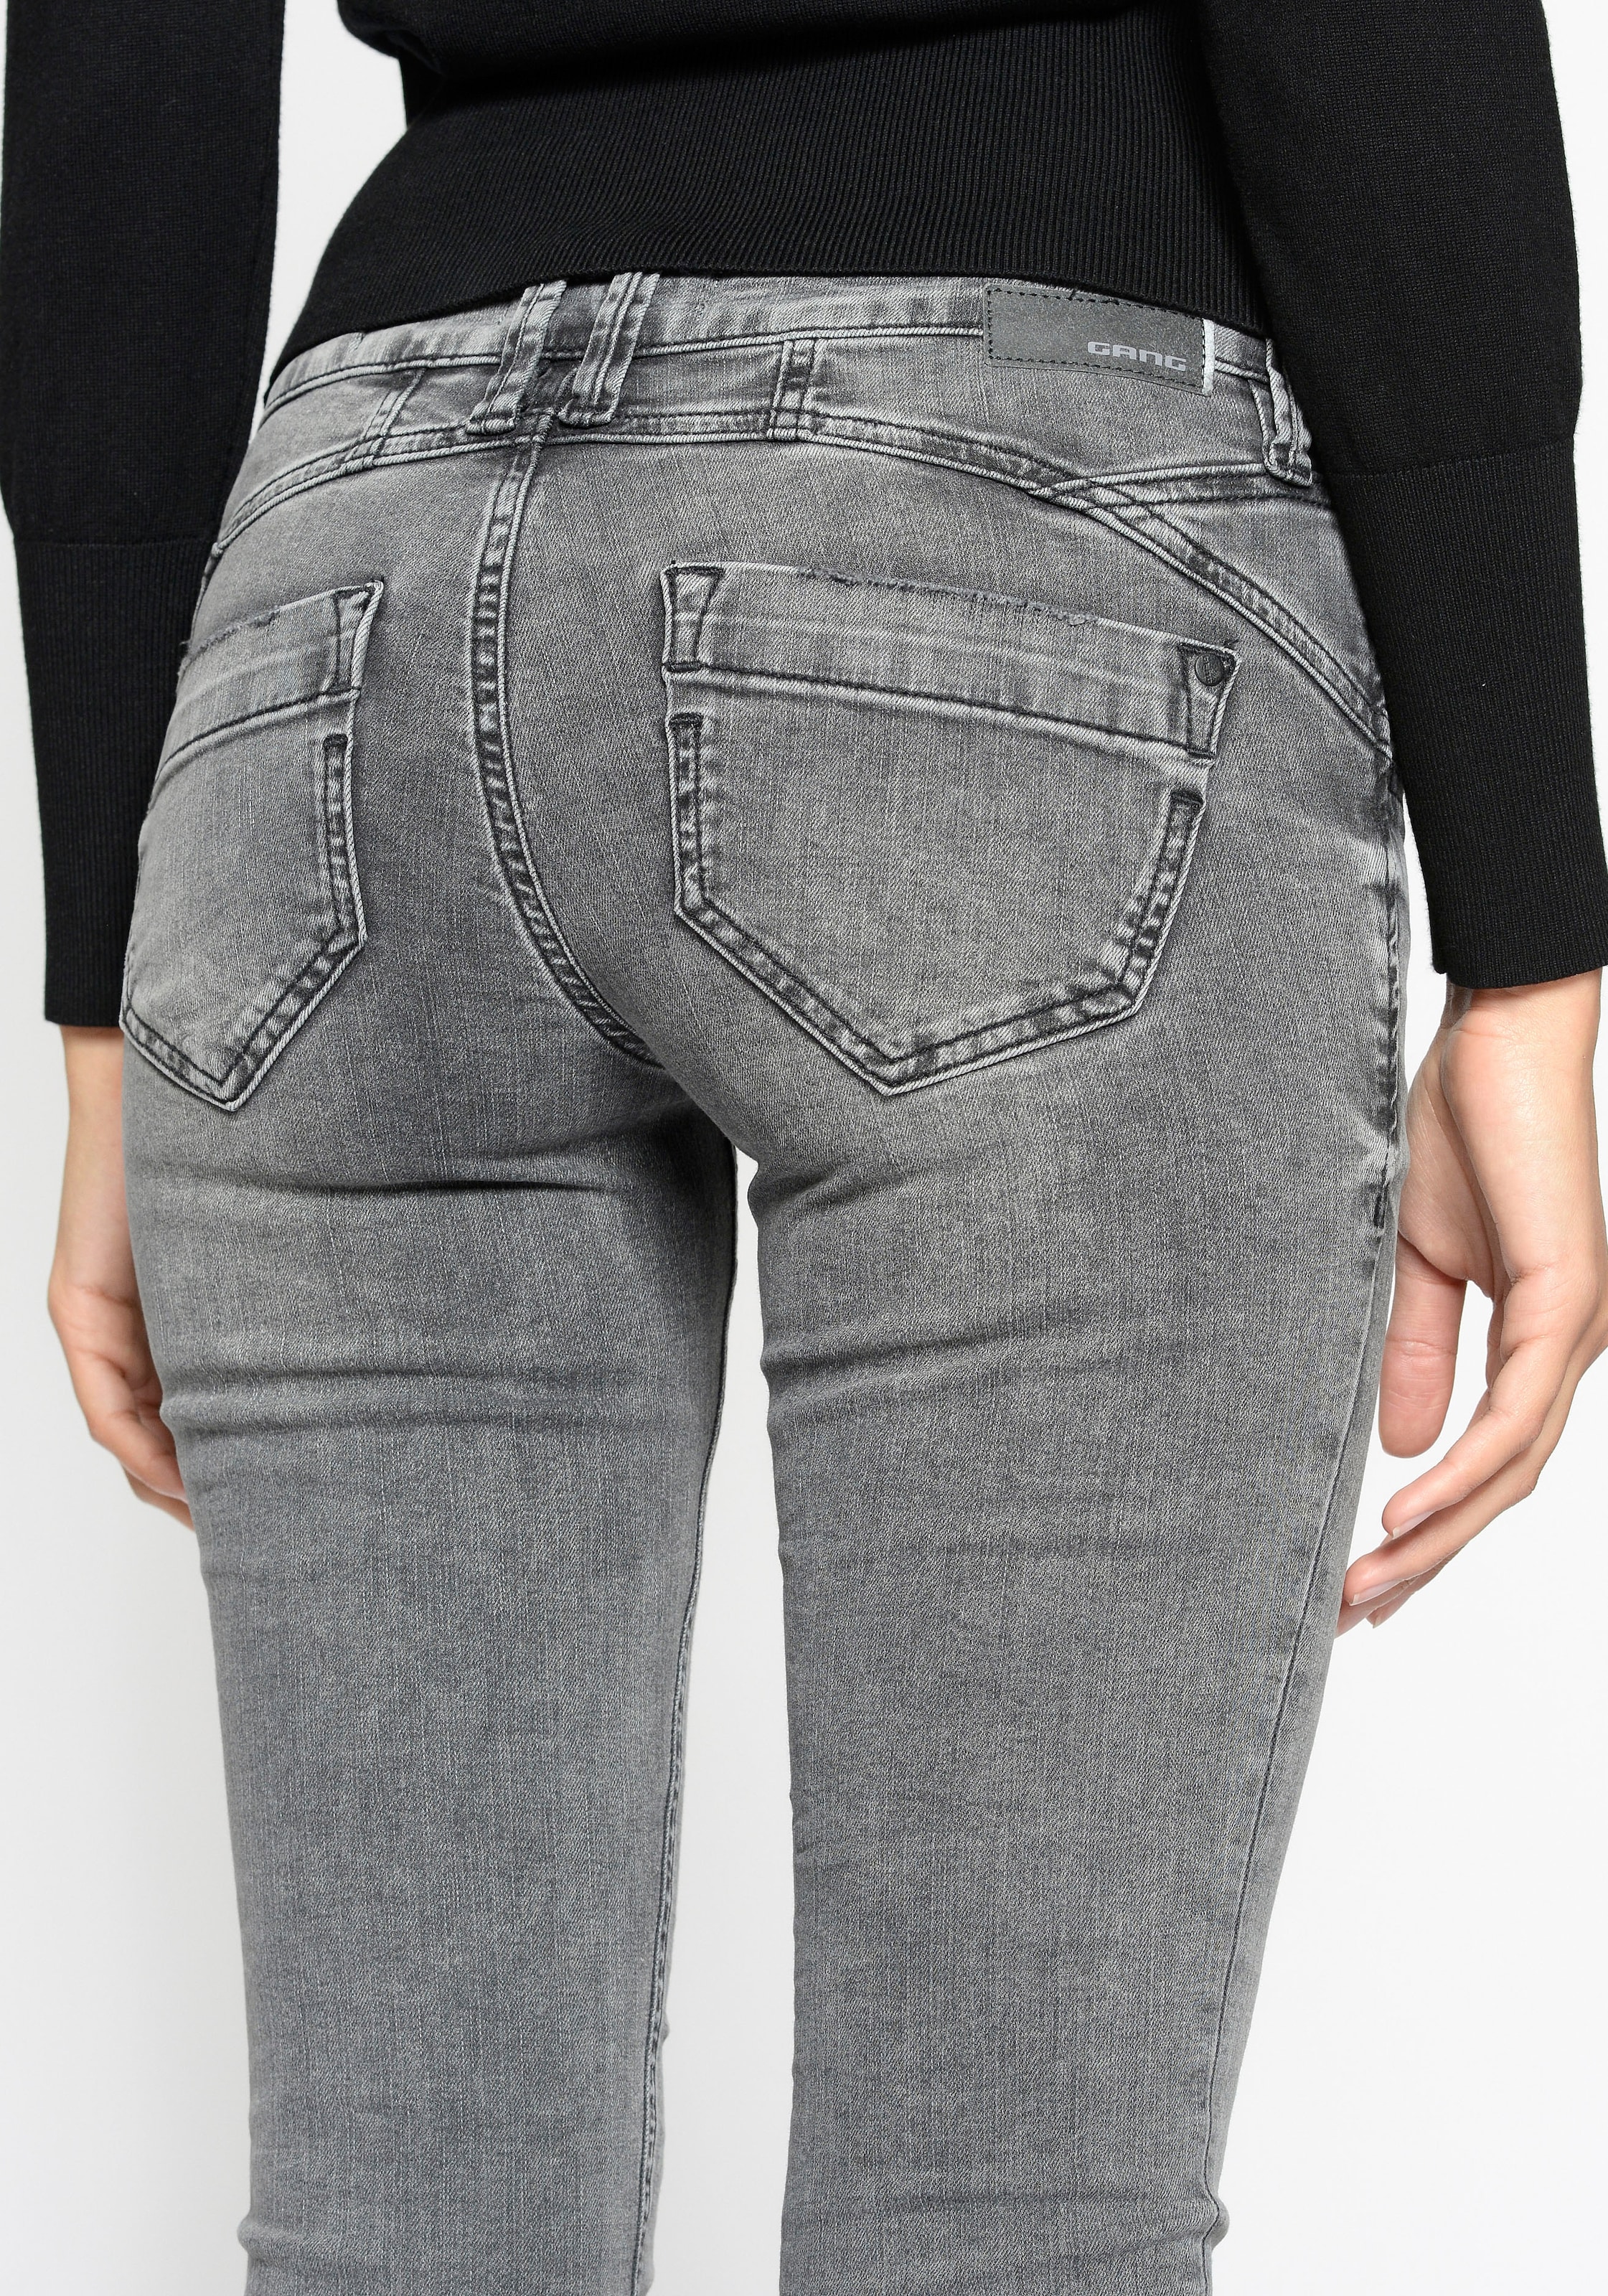 Skinny-fit-Jeans shoppen walking | in I\'m authenischer Used-Waschung »94Nena«, GANG